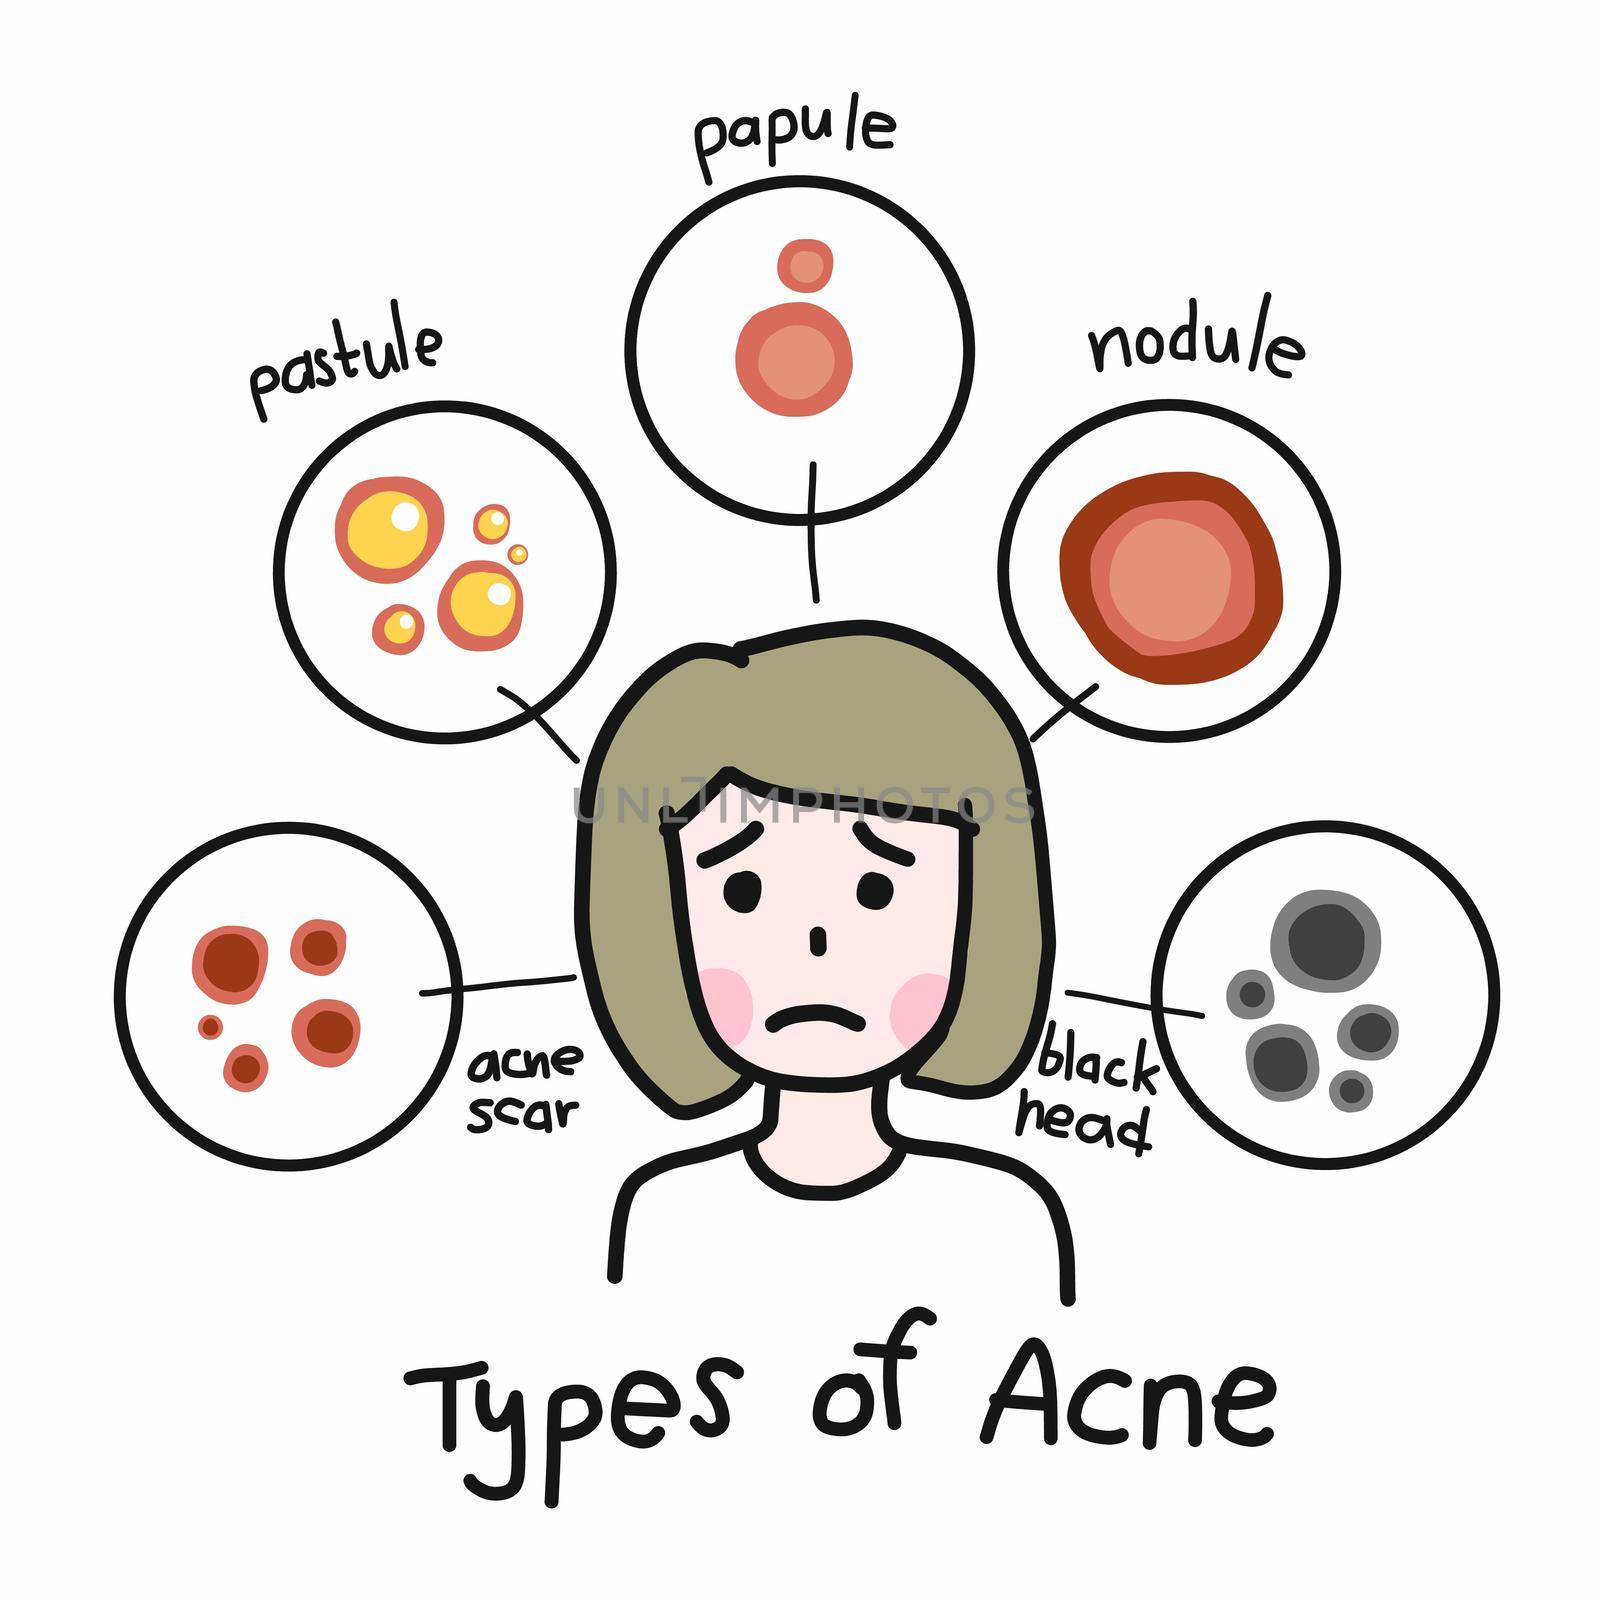 Type of acne , Cute woman cartoon face vector illustration by Yoopho